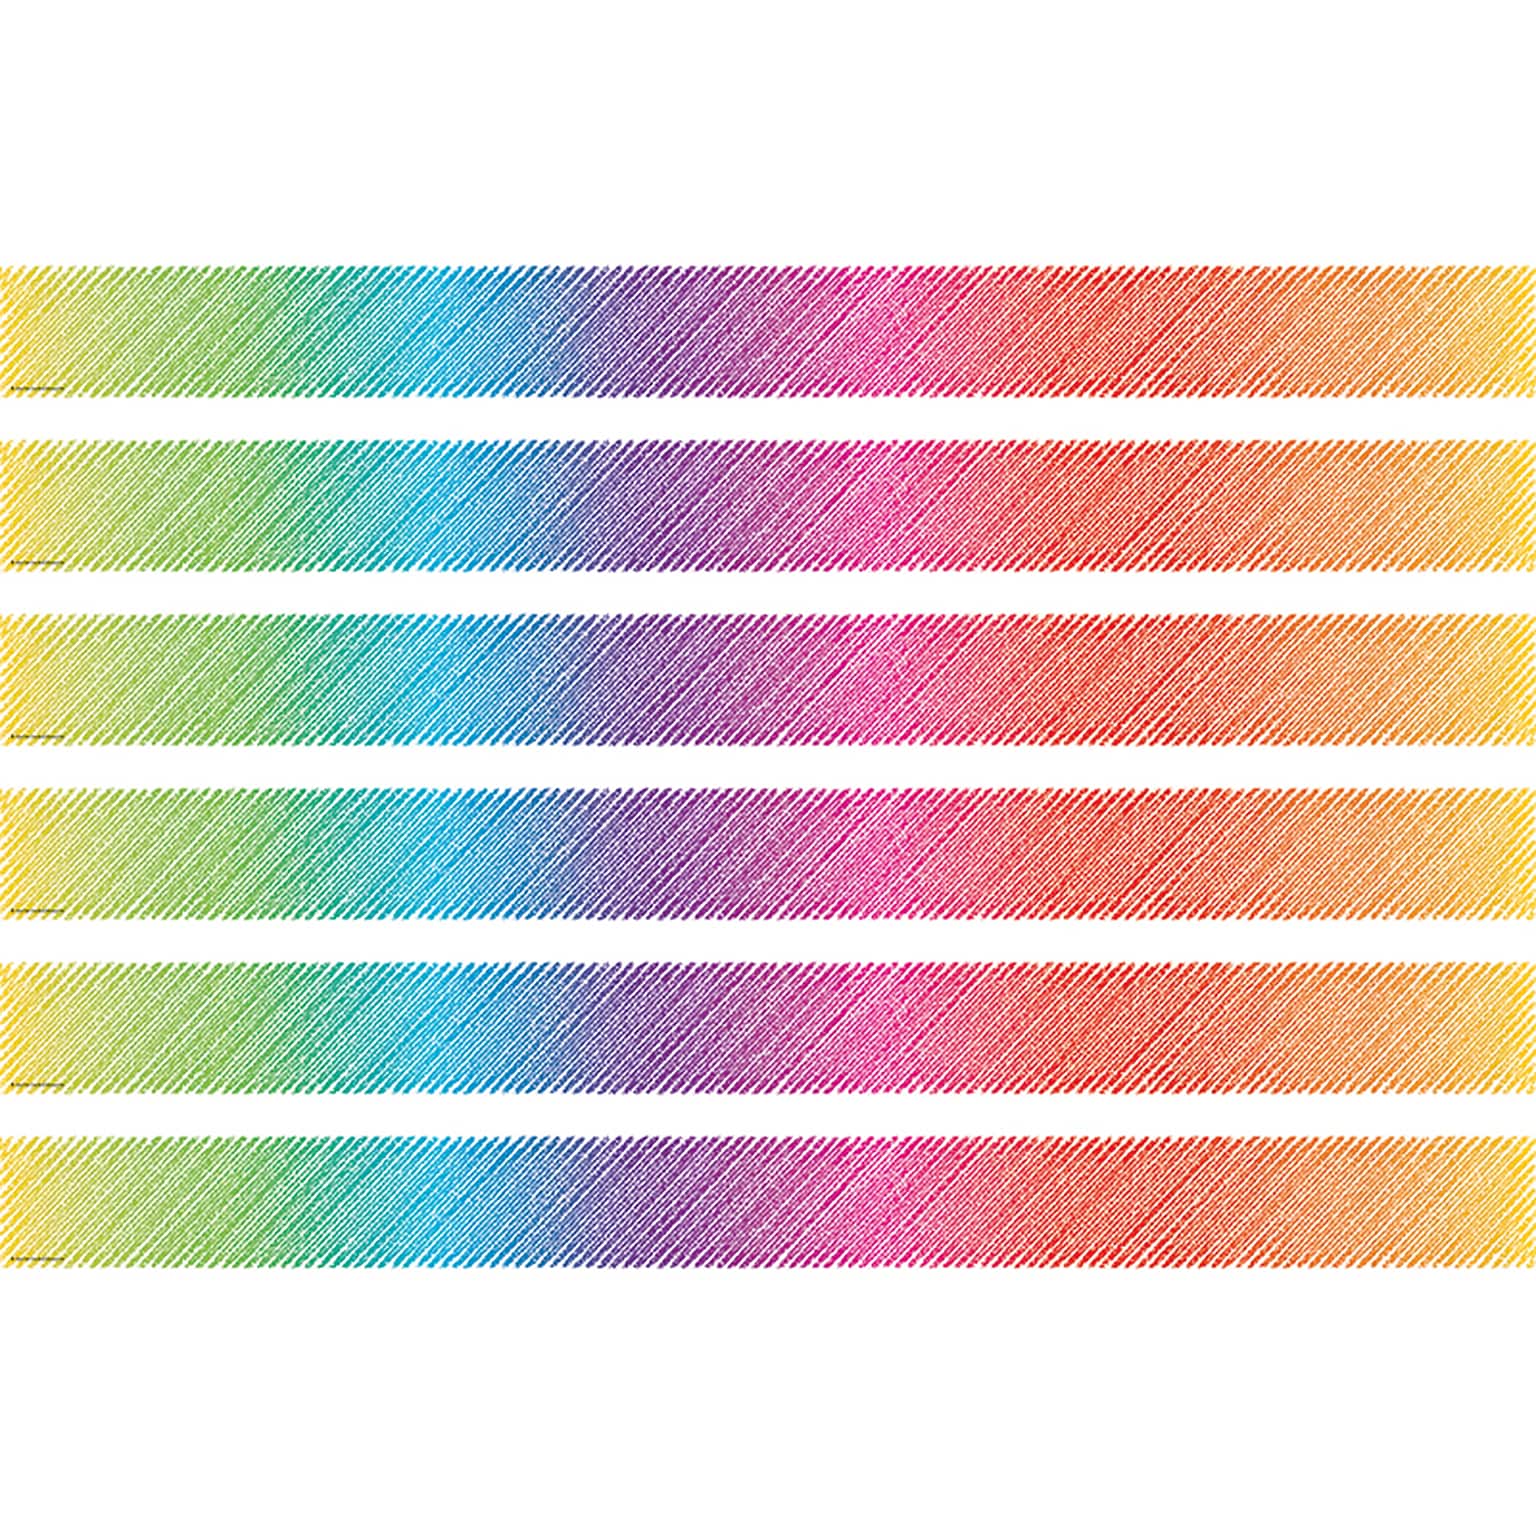 Teacher Created Resources Colorful Scribble Straight Border Trim, 35 Feet Per Pack, 6 Packs (TCR3418-6)